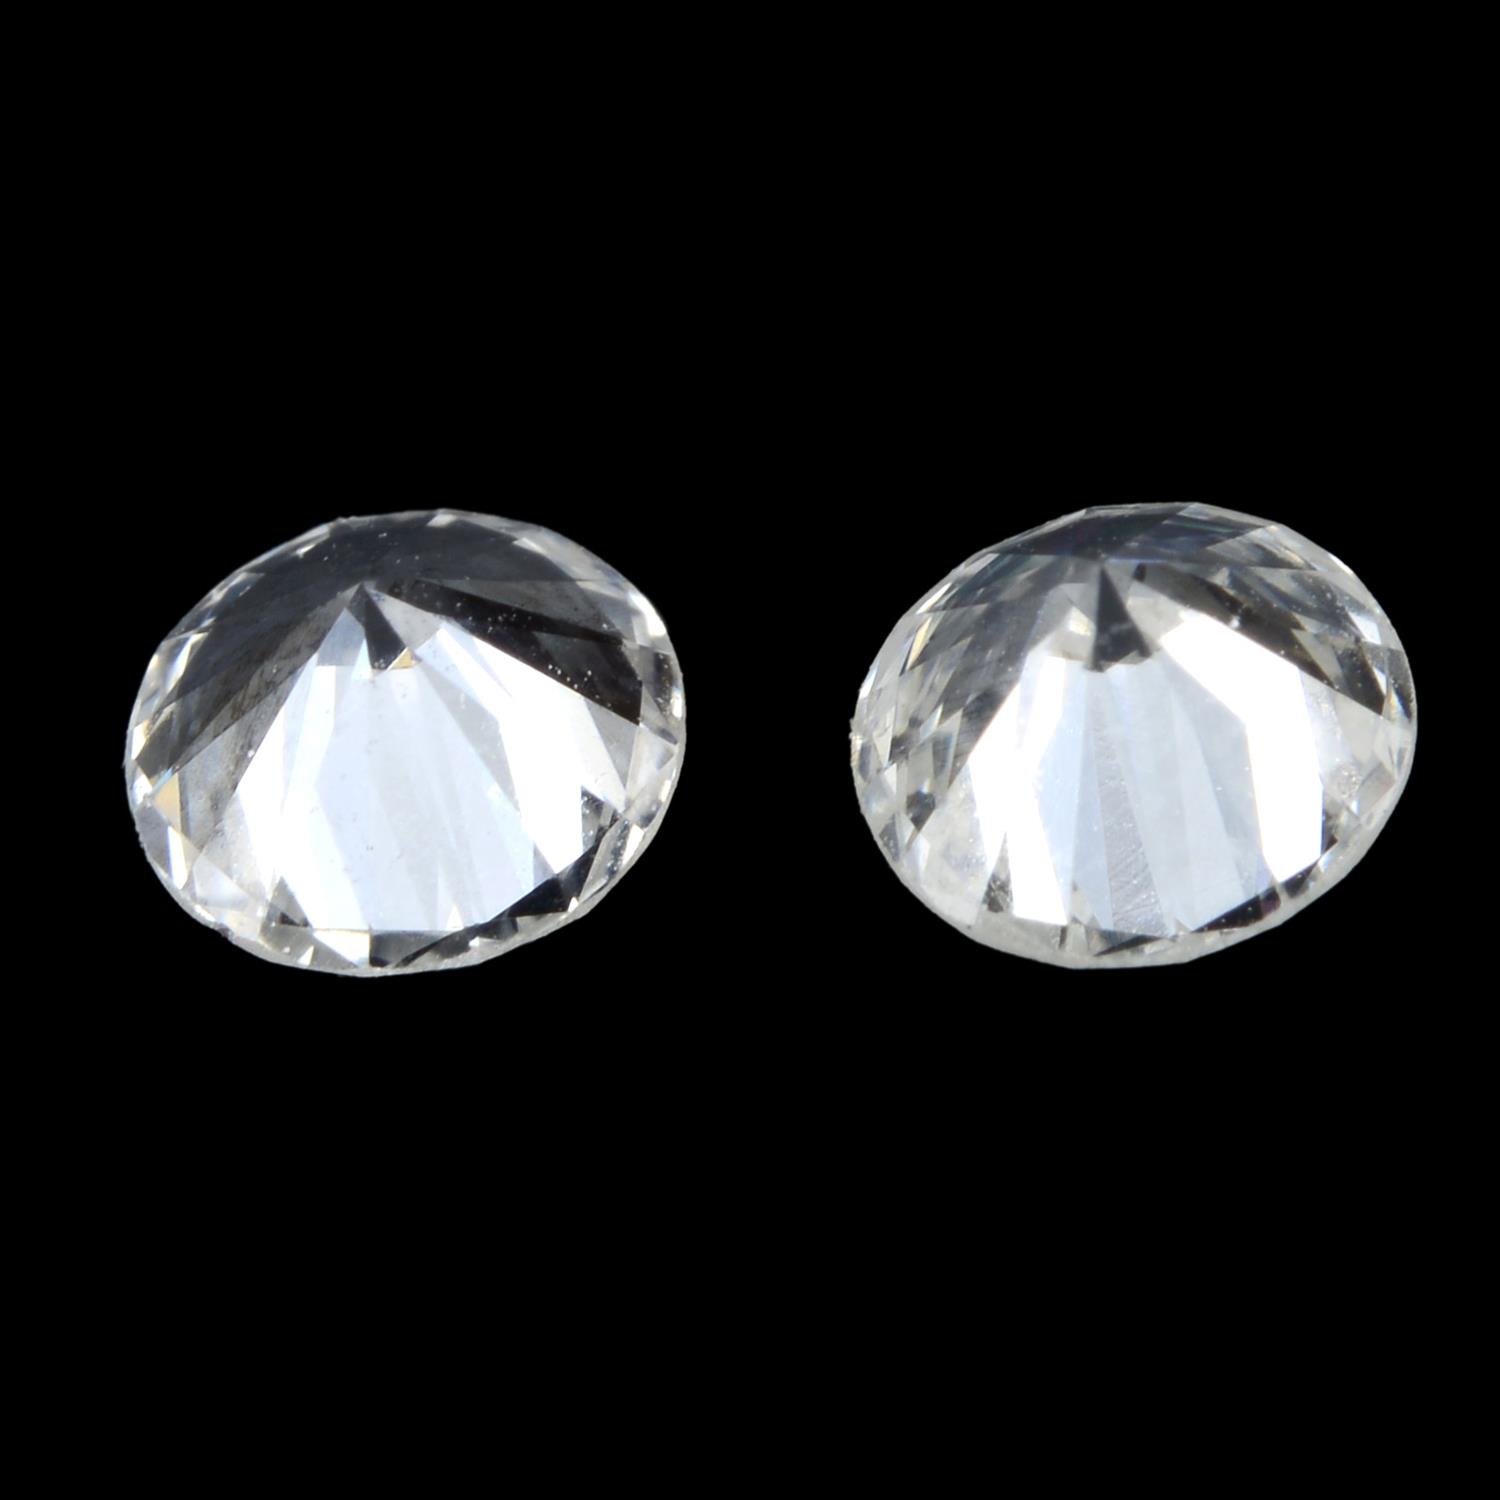 Pair of brilliant cut diamonds weighing 0.50ct - Image 2 of 2